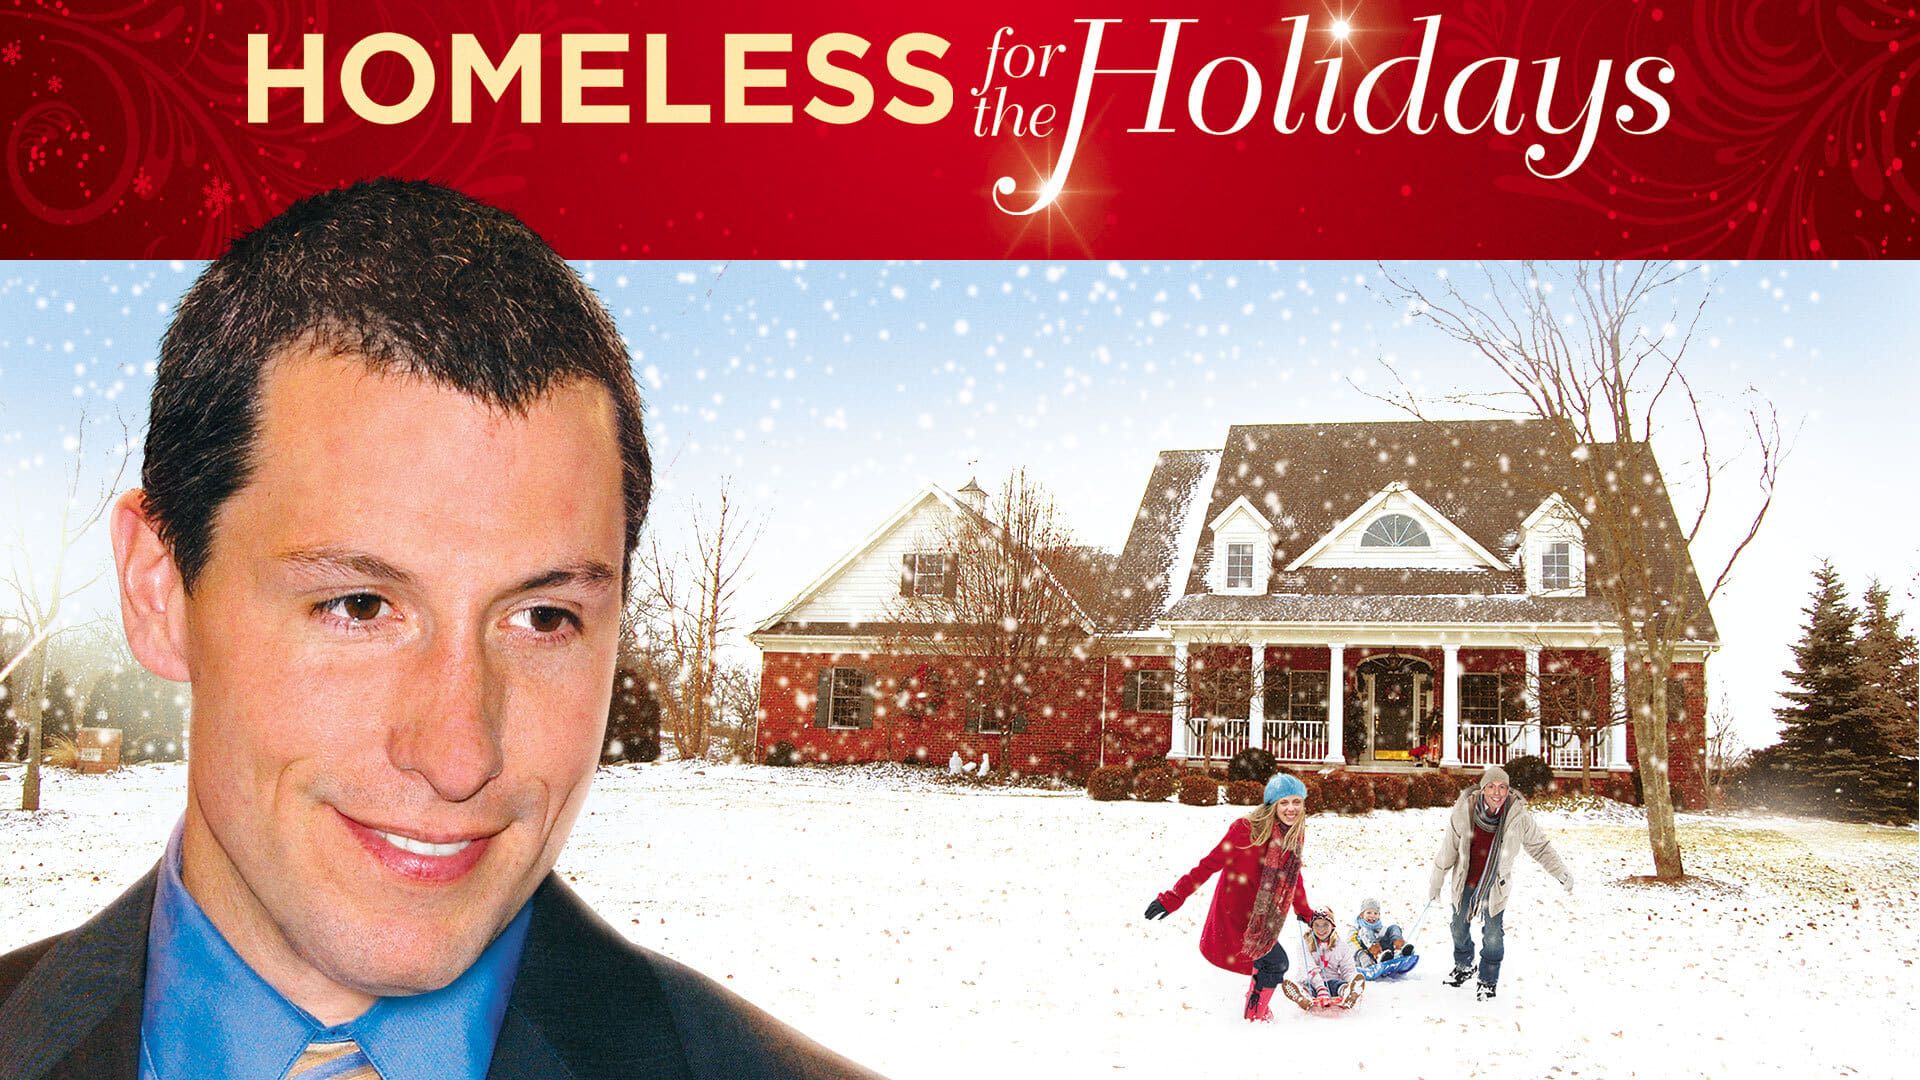 Homeless for the Holidays background